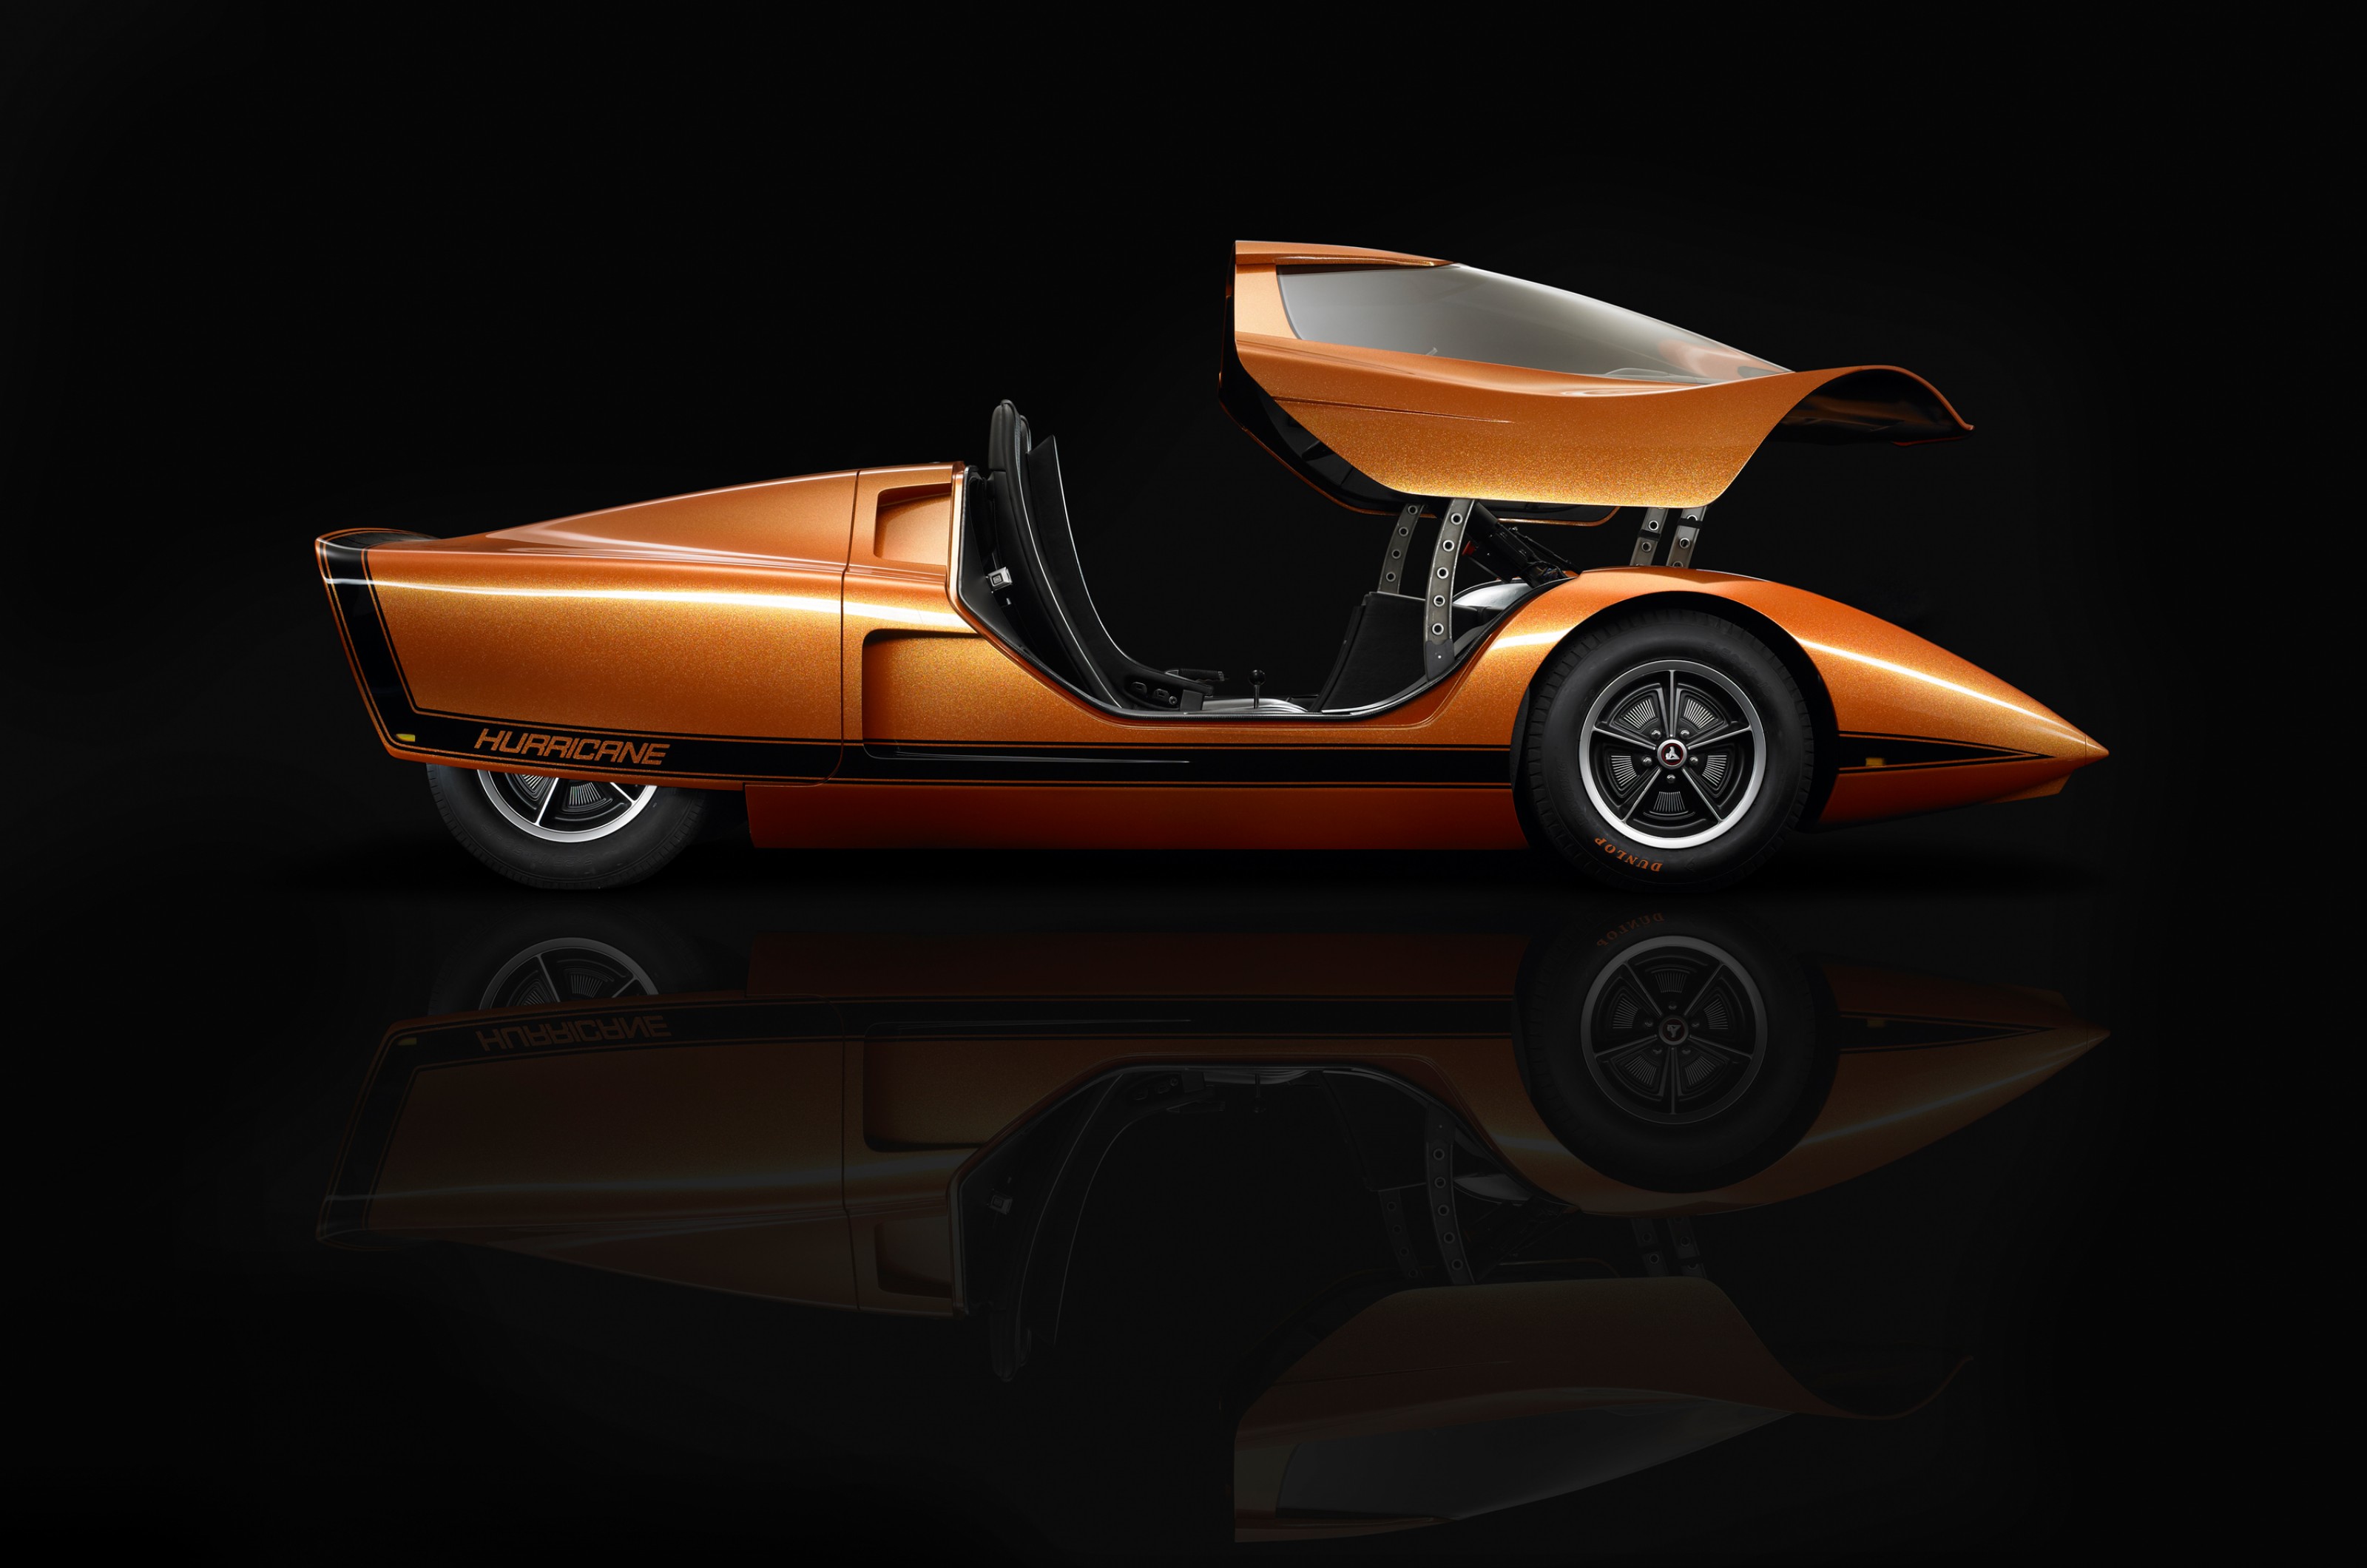 <p>In overcoming the incredibly low stance of the Holden Hurricane, its designers weren’t content with the idea of occupants awkwardly rising to their feet to hop out of the sports car.</p>  <p>As the hydraulically powered clamshell canopy opened, the seats simultaneously lifted slightly and titled forwards like a motorized armchair.</p>  <p>This strange opening allowed for an uninterrupted view out of the front thanks to a pillarless Plexiglass windshield.</p>  <p>Rearward vision was non-existent so the Hurricane has a rear-mounted camera, something that’s still seen as a luxury on modern cars today.</p>  <p>It was clear this car was never intended for series production, but for the late ’60s this was a revolutionary concept that gave a glimpse into the future.</p>